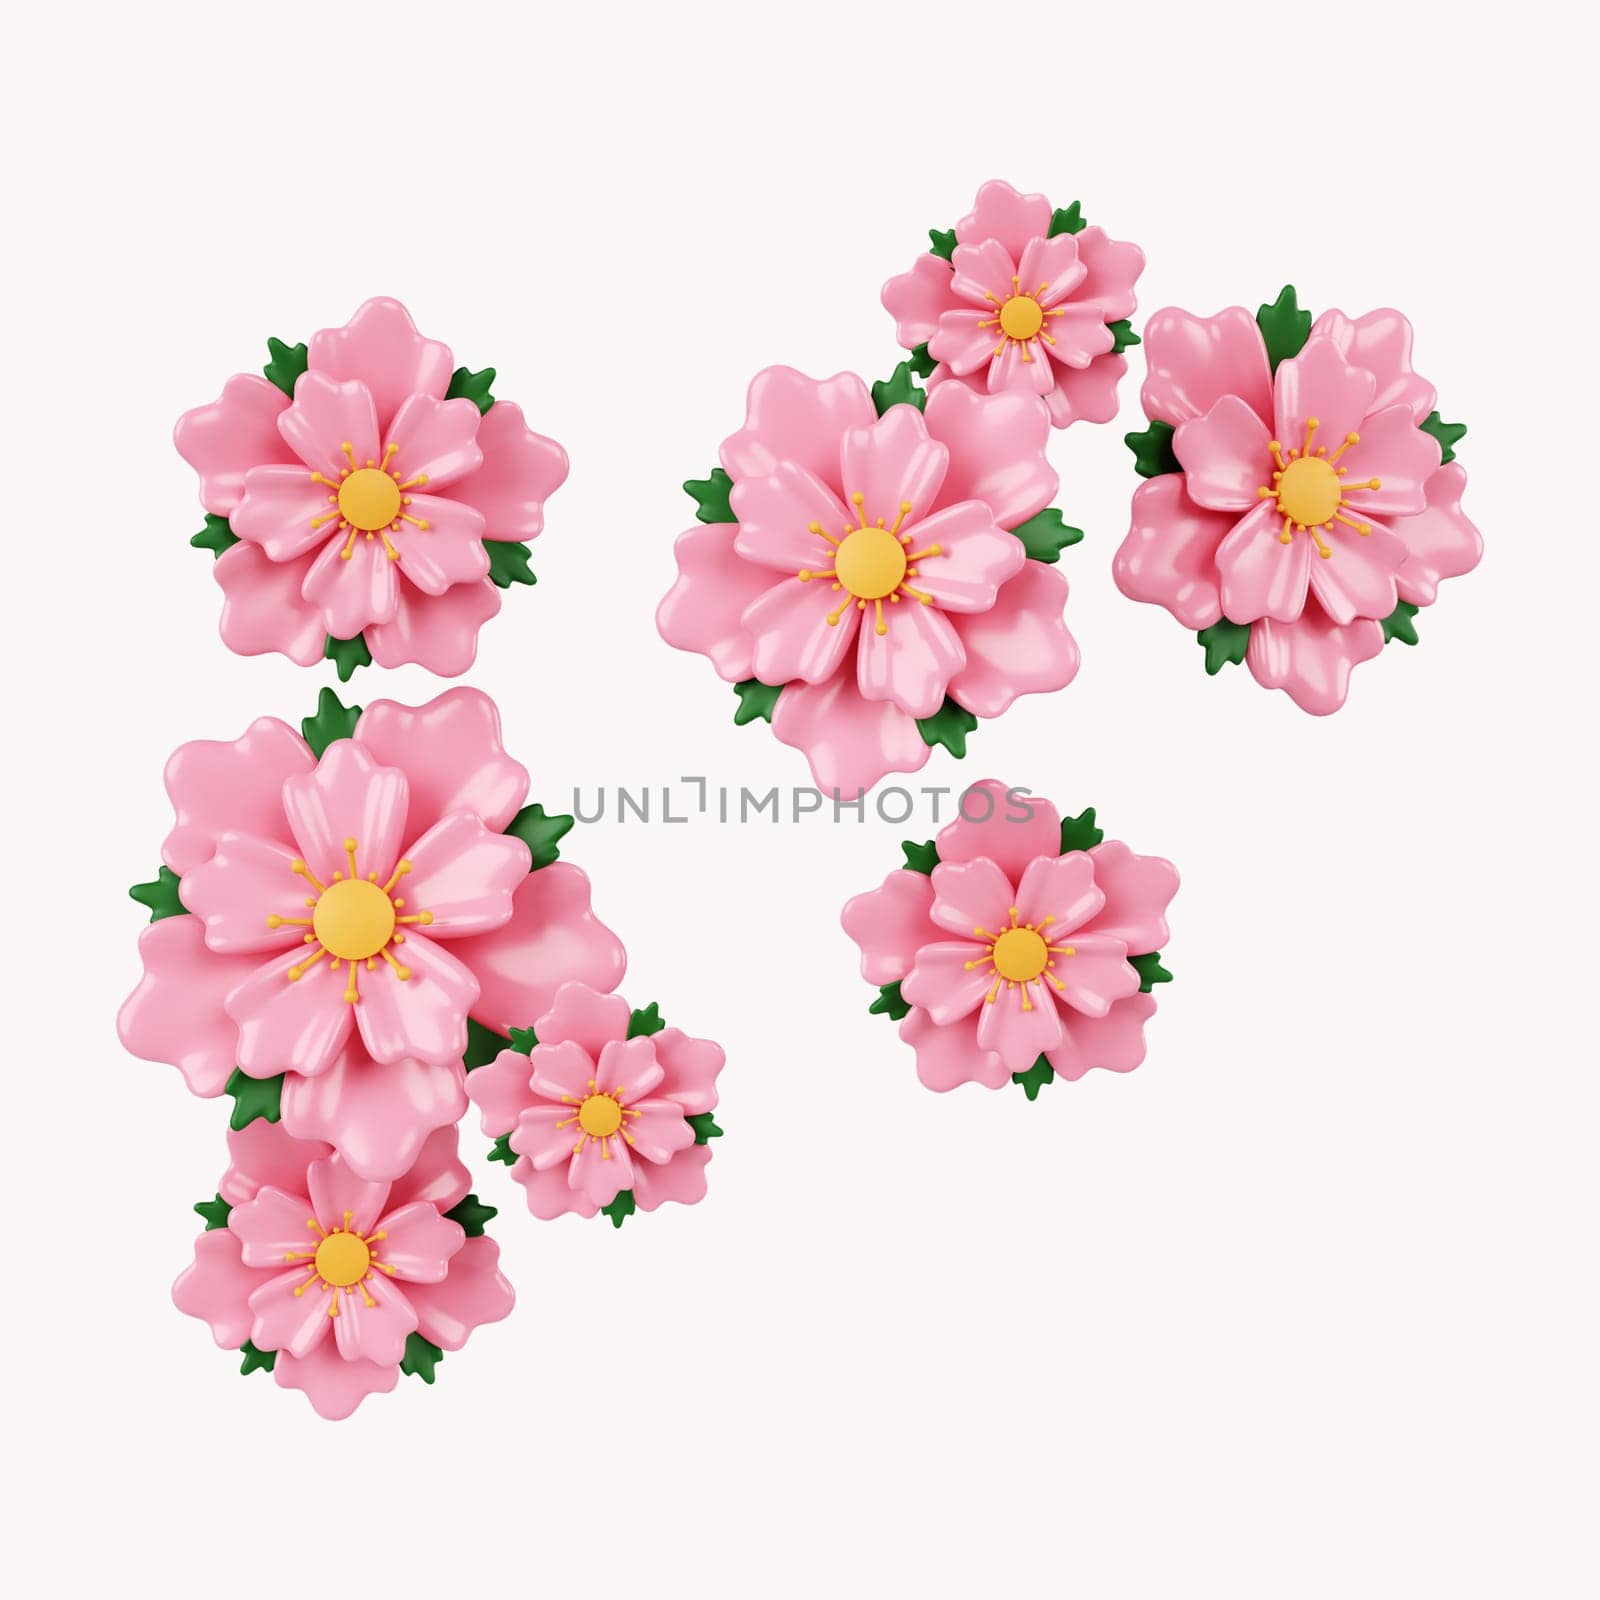 3d Sakura flowers .icon isolated on white background. 3d rendering illustration. Clipping path. by meepiangraphic